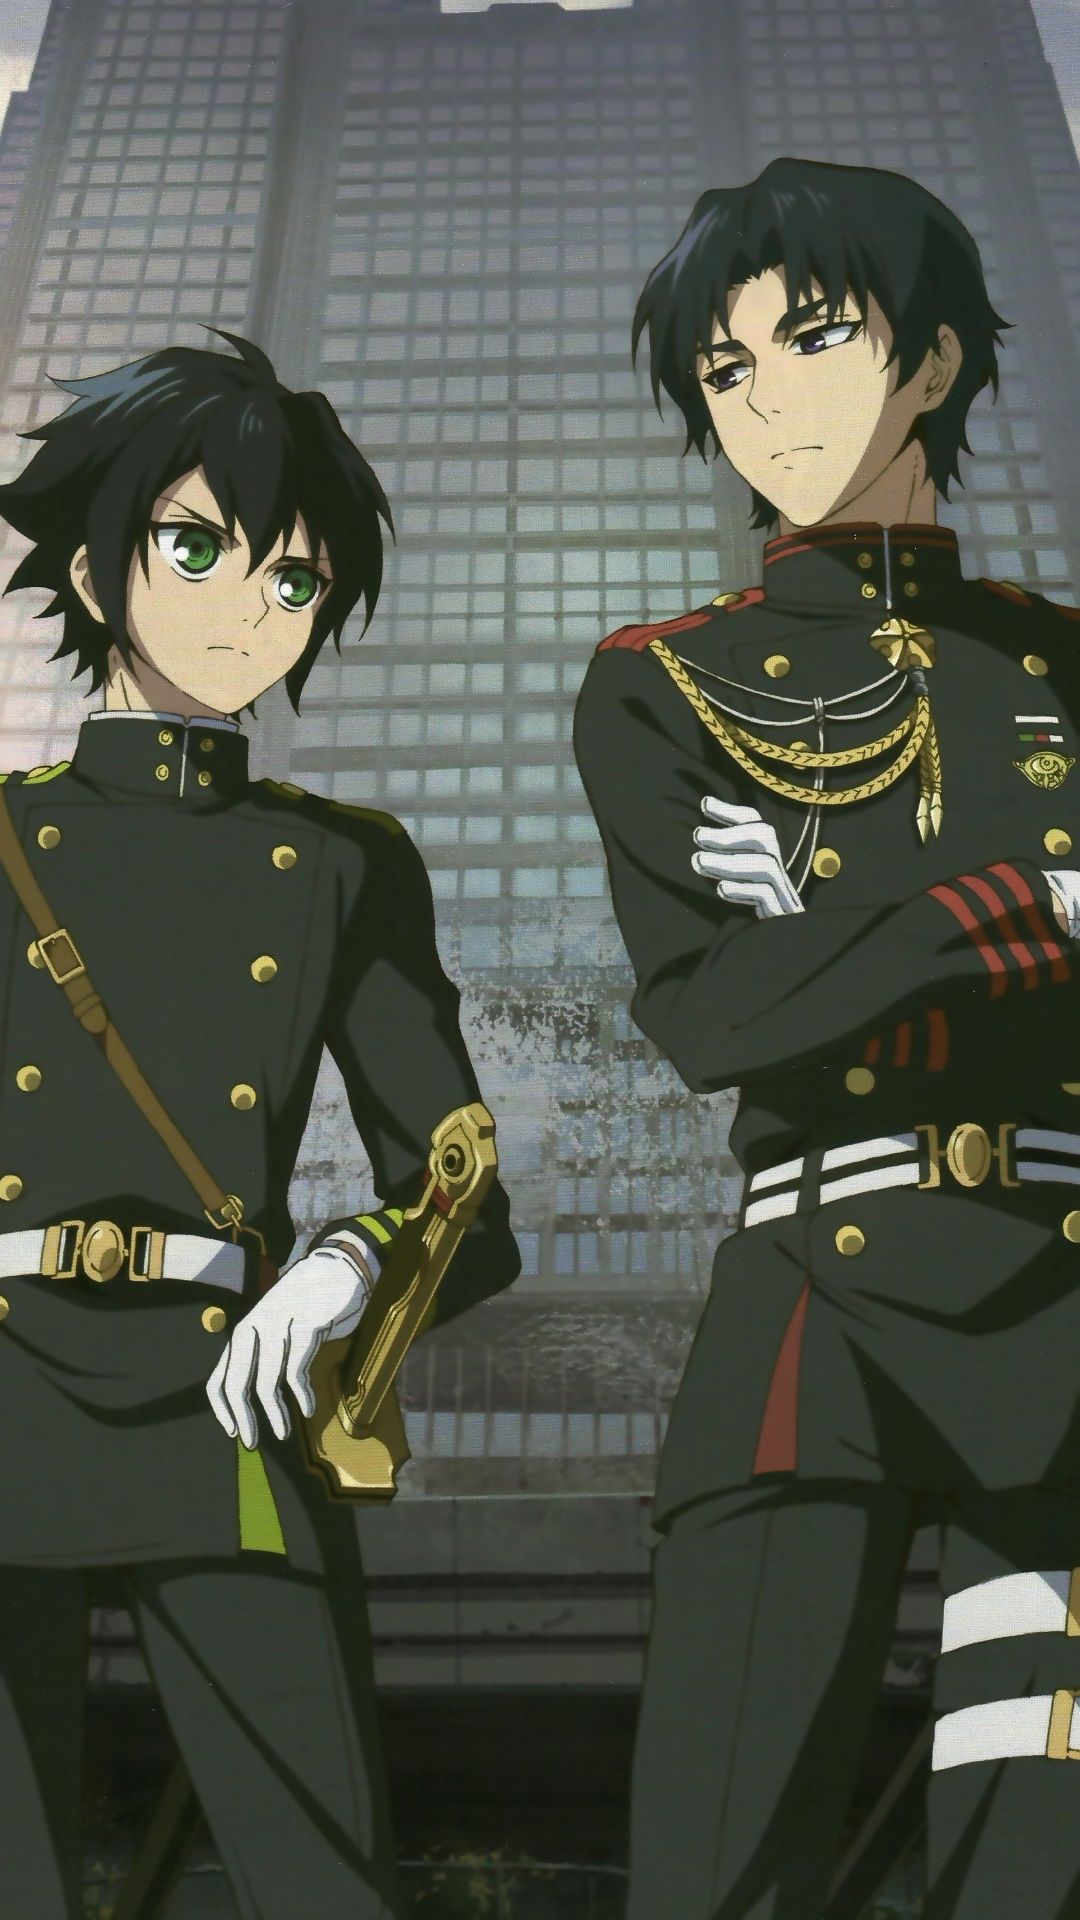 Owari no Seraph (Seraph of the End) anime wallpaper for iPhone and android smartphones